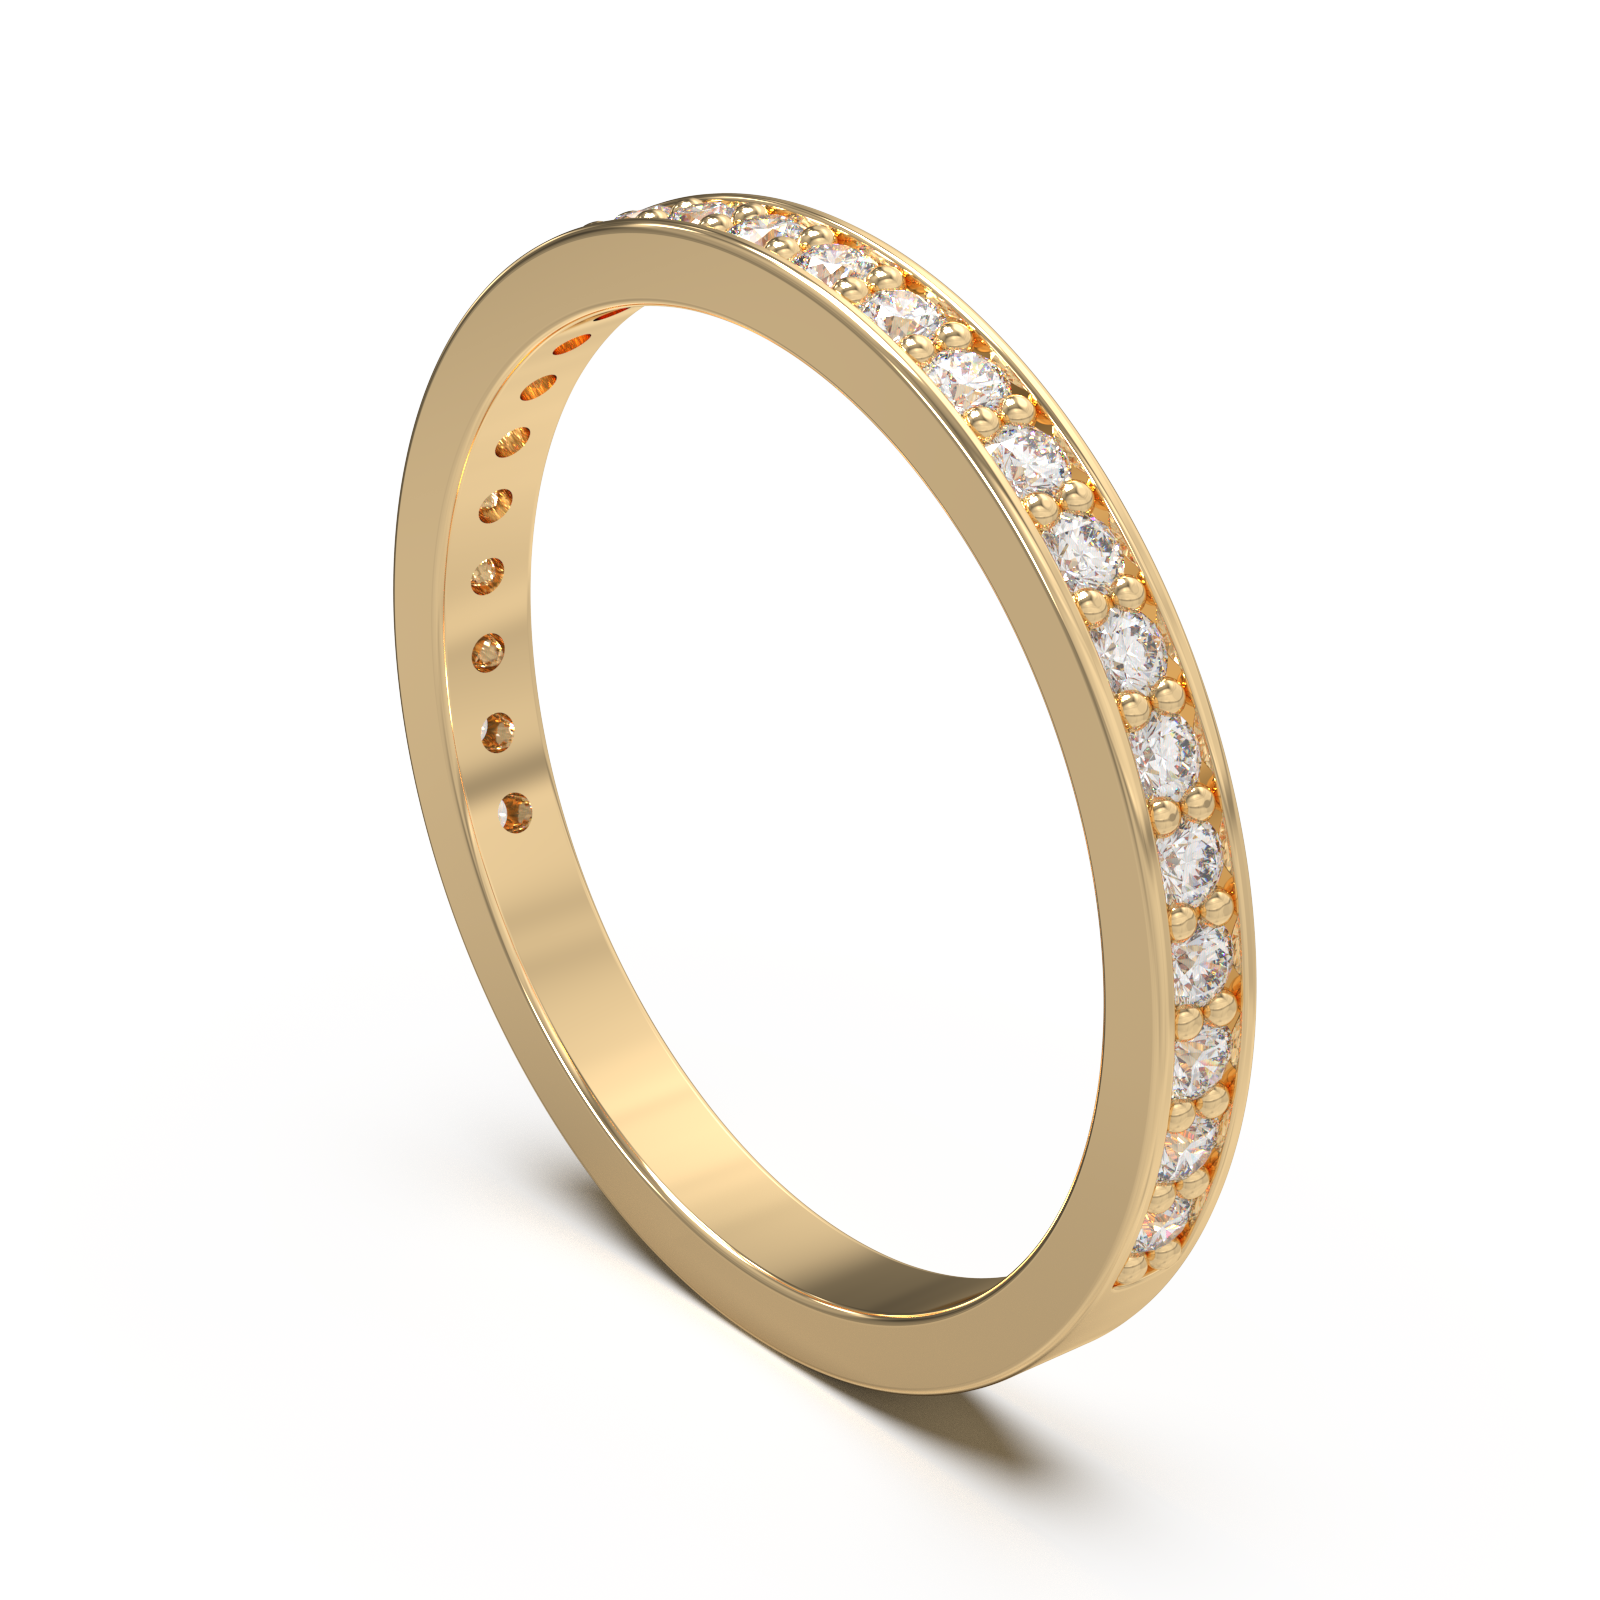 Shiny lab diamond band with channel setting, offered in different gold colors and platinum options.